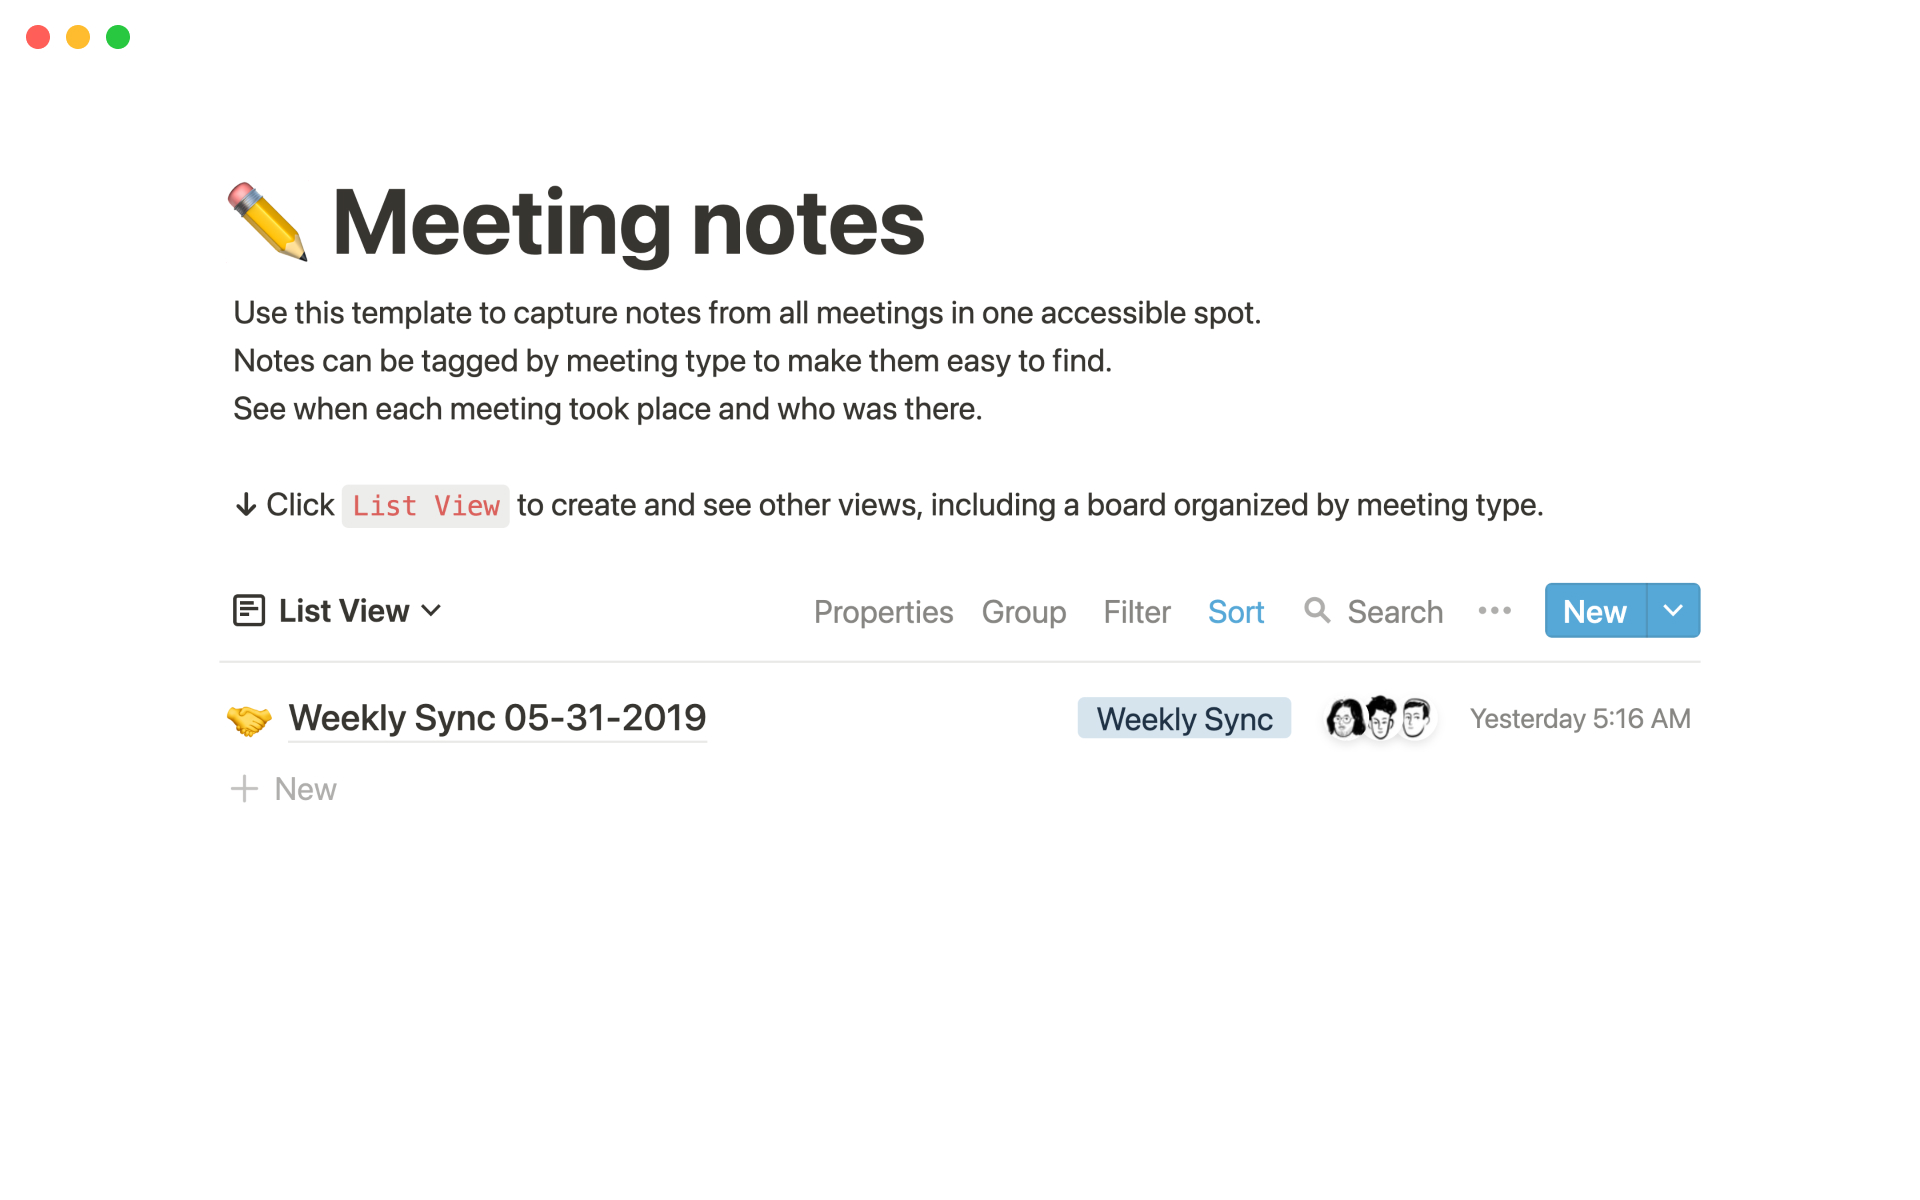 The desktop image for the Meeting notes template